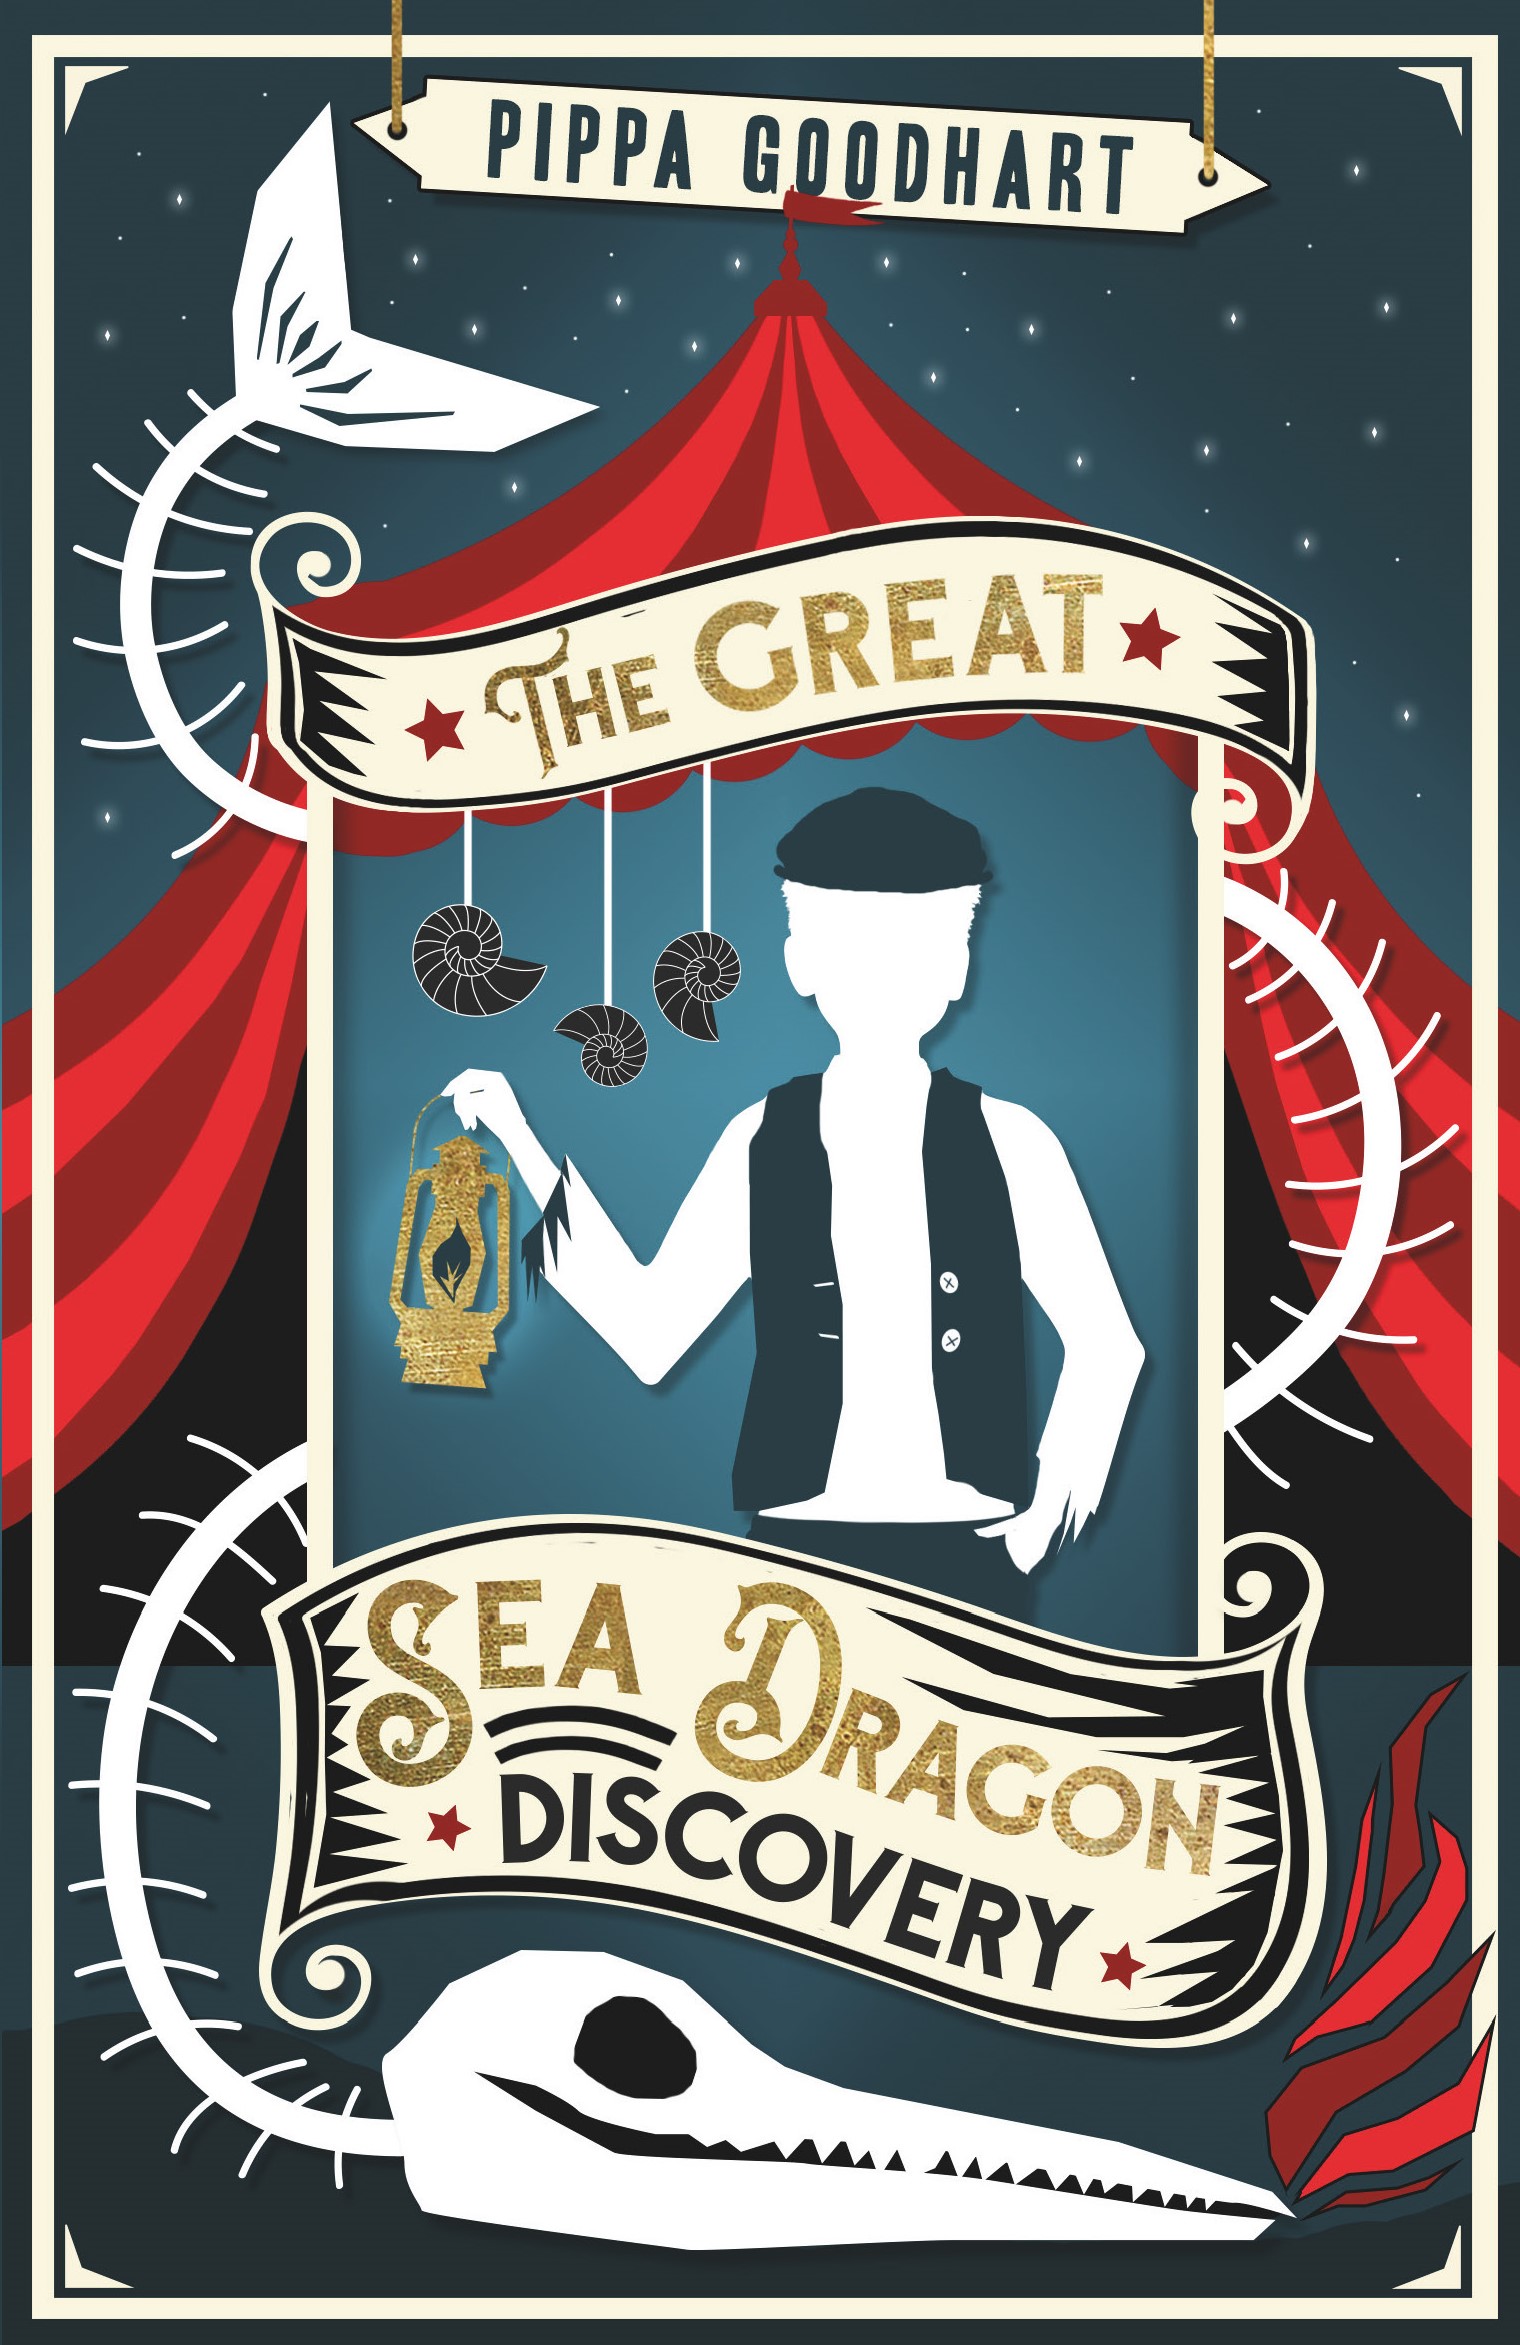 THE GREAT SEA DRAGON DISCOVERY FULL COVER LH FINAL_Page_1.jpg